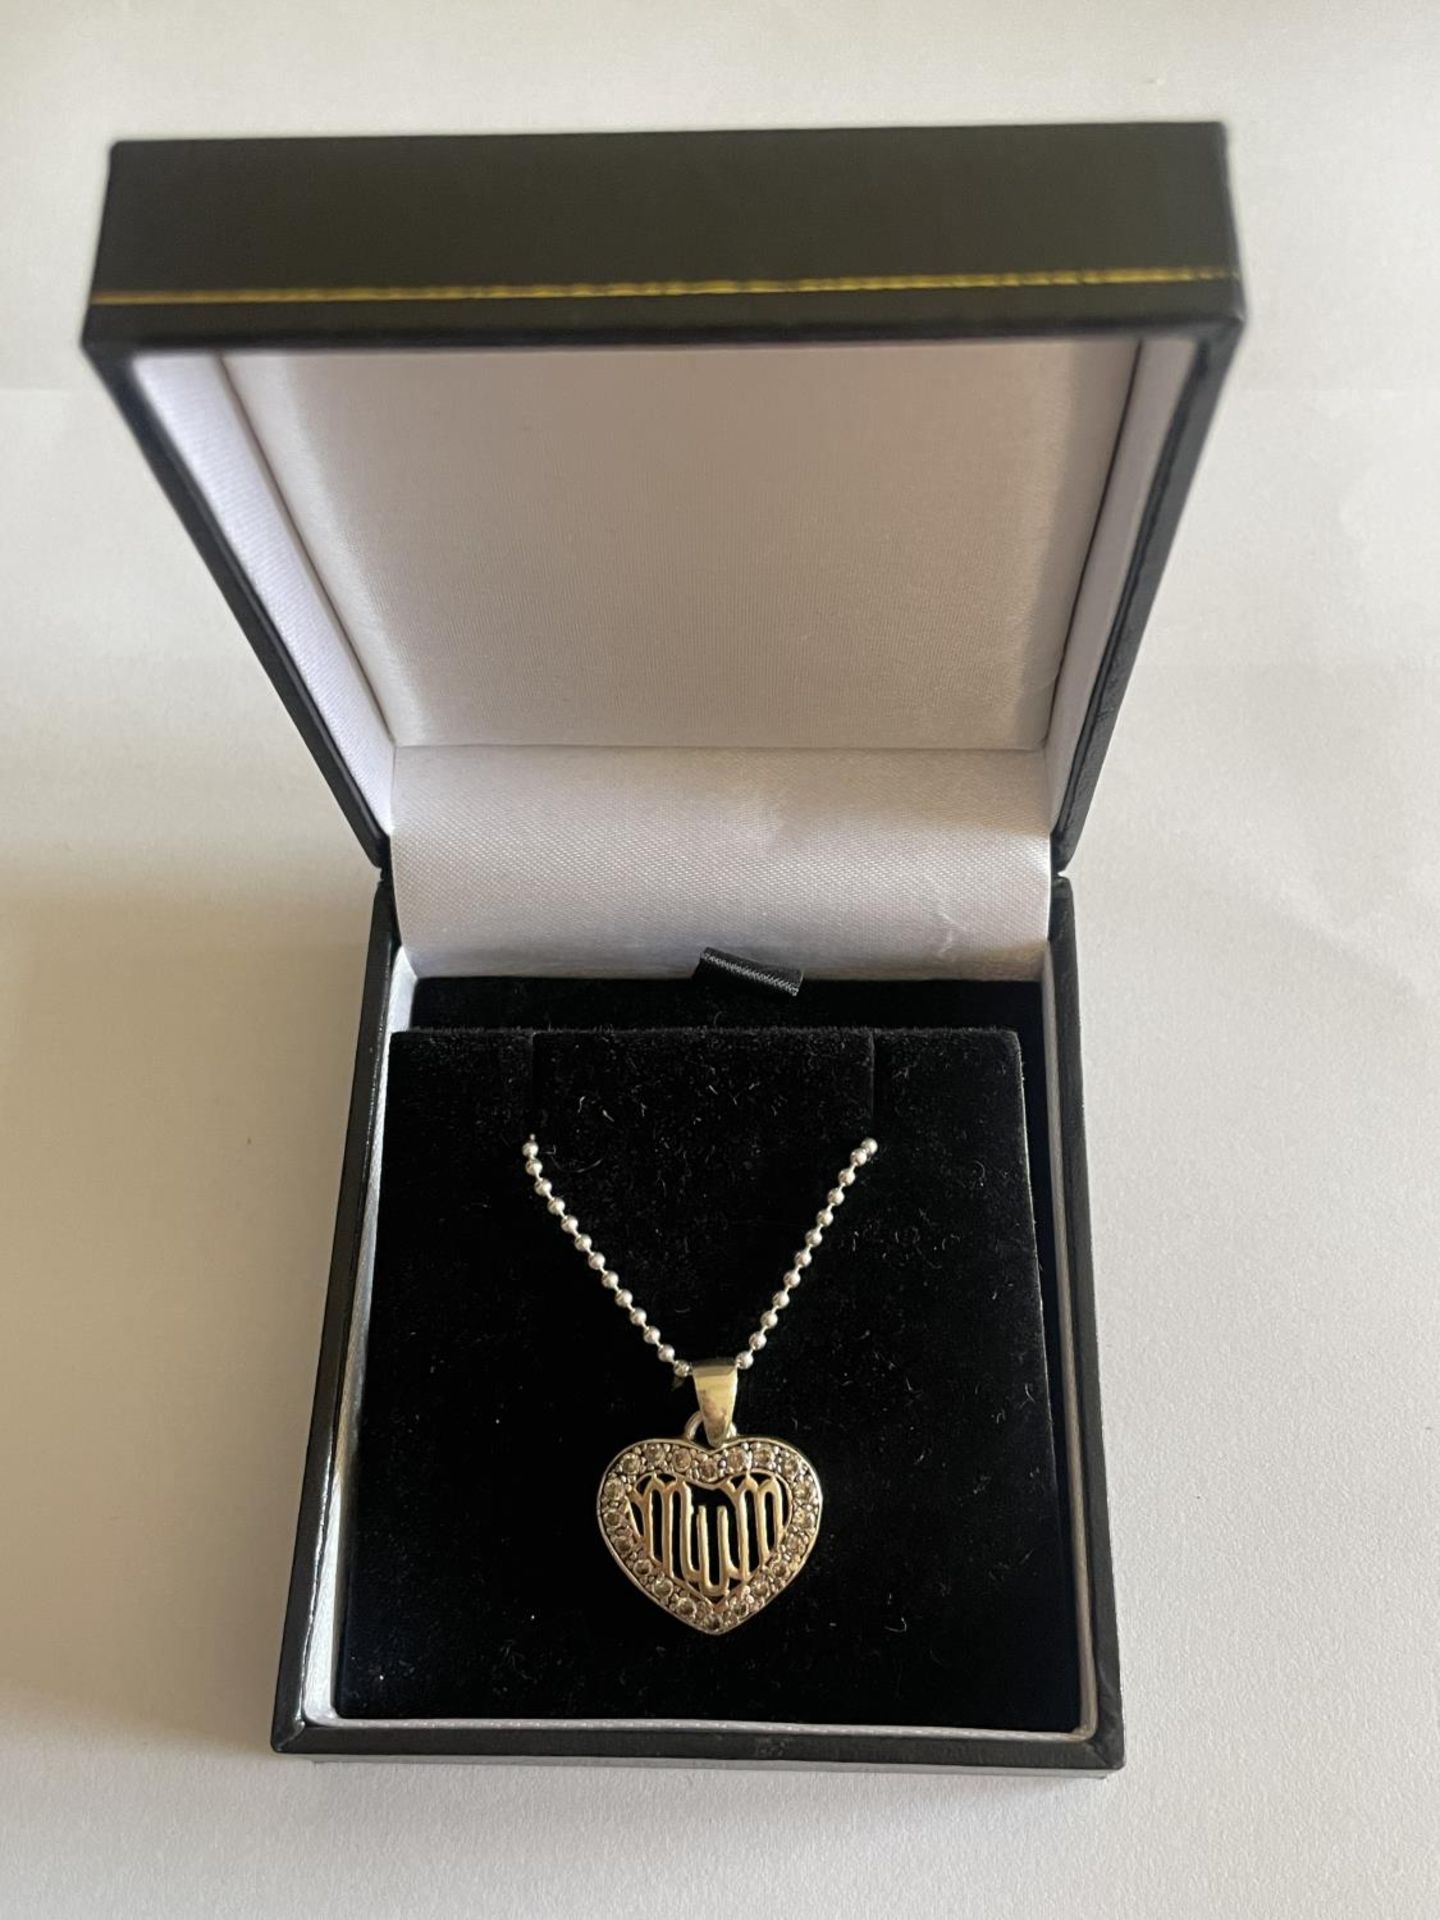 A SILVER NECKLACE WITH MUM PENDANT IN A PRESENTATION BOX